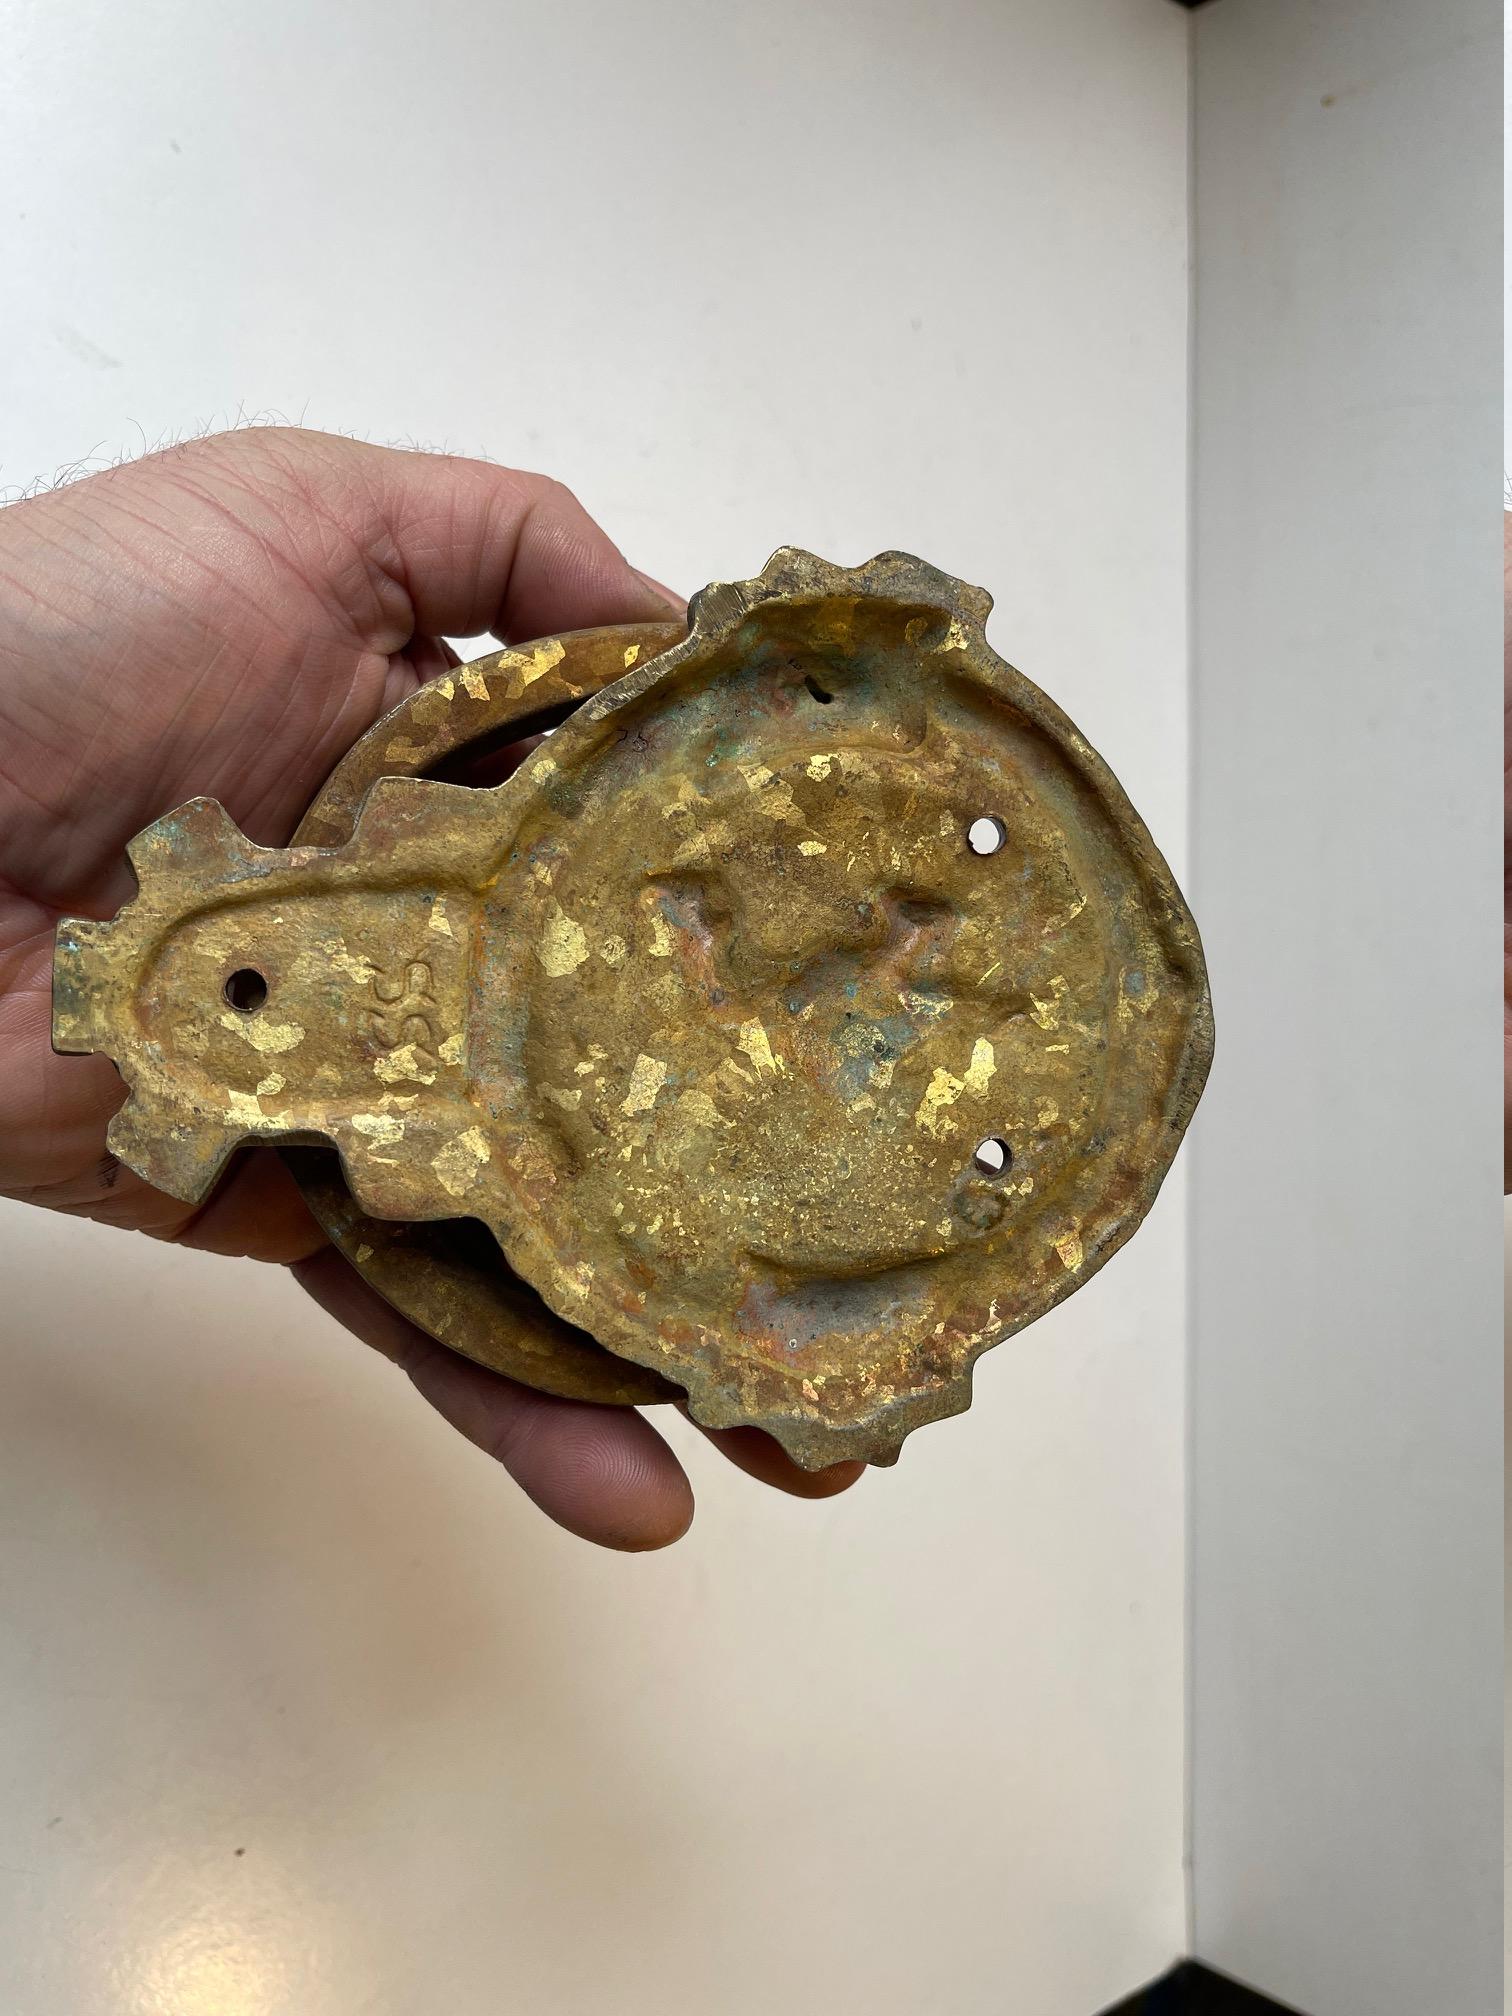 Antique Bronze Door Knocker with Hunting Theme In Good Condition For Sale In Esbjerg, DK